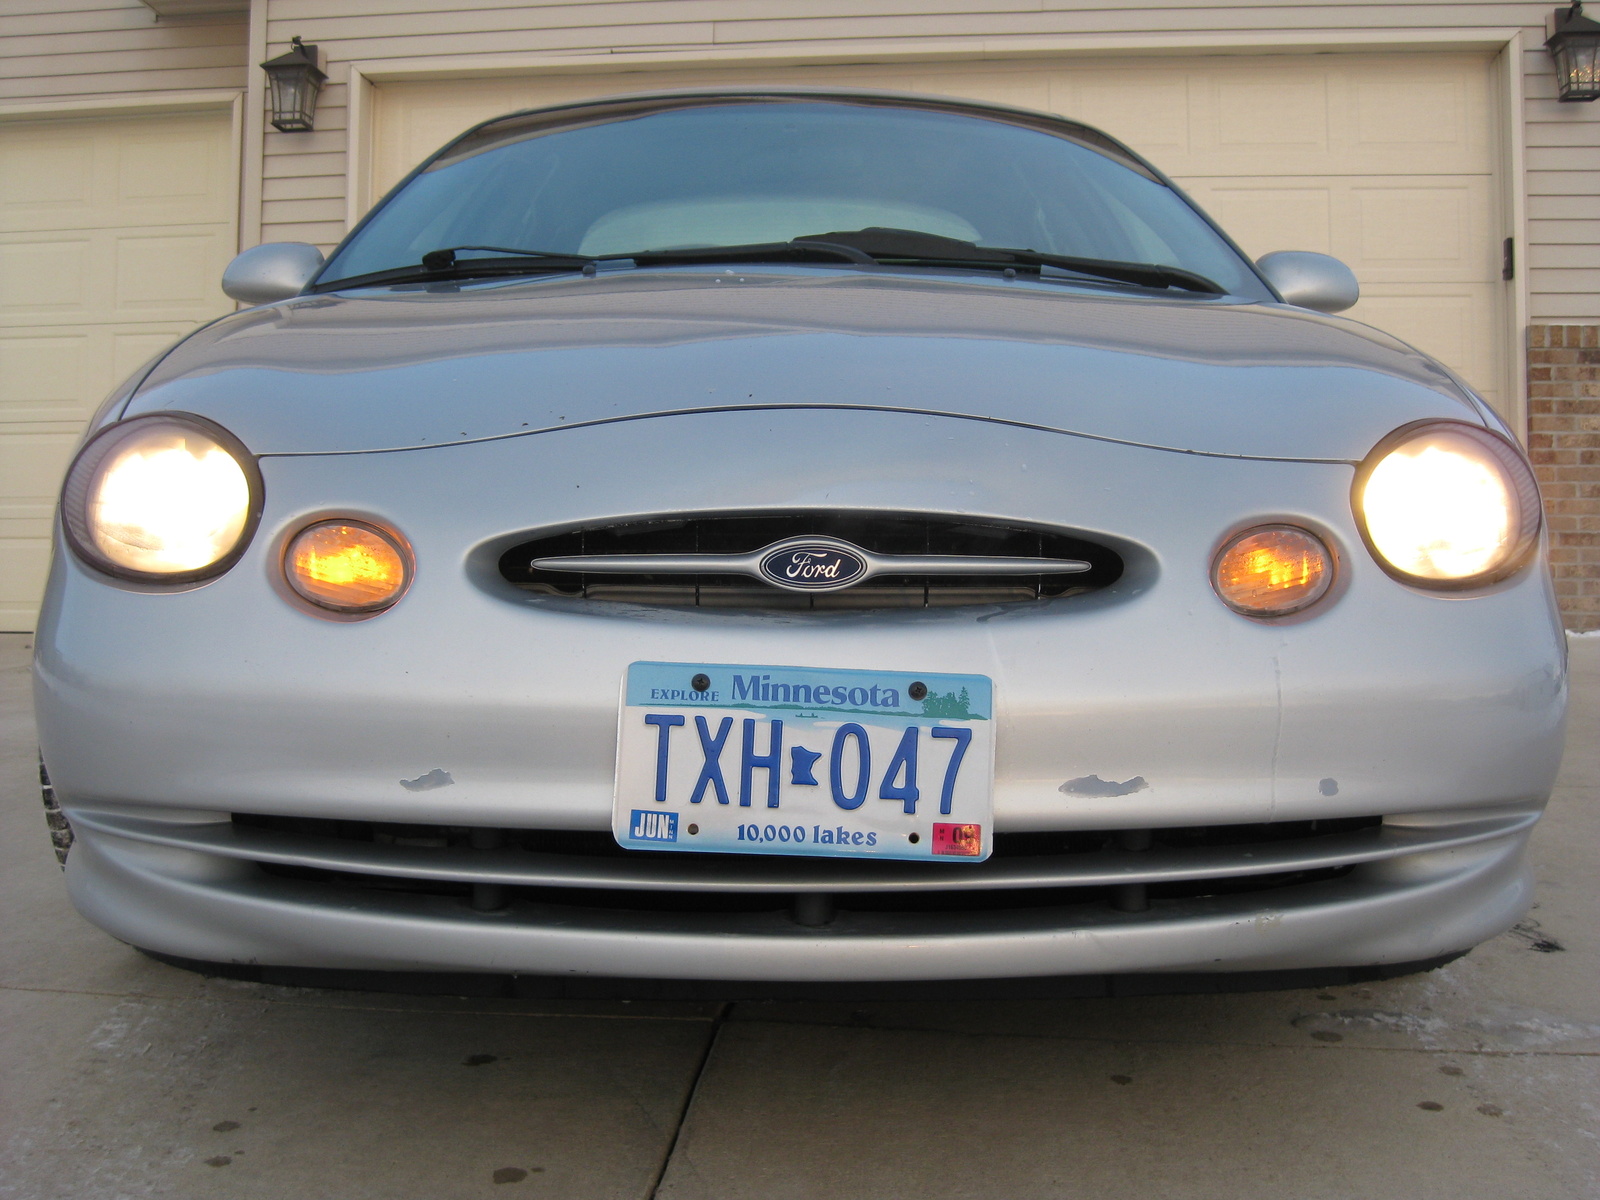 1999 Ford taurus sho review #4